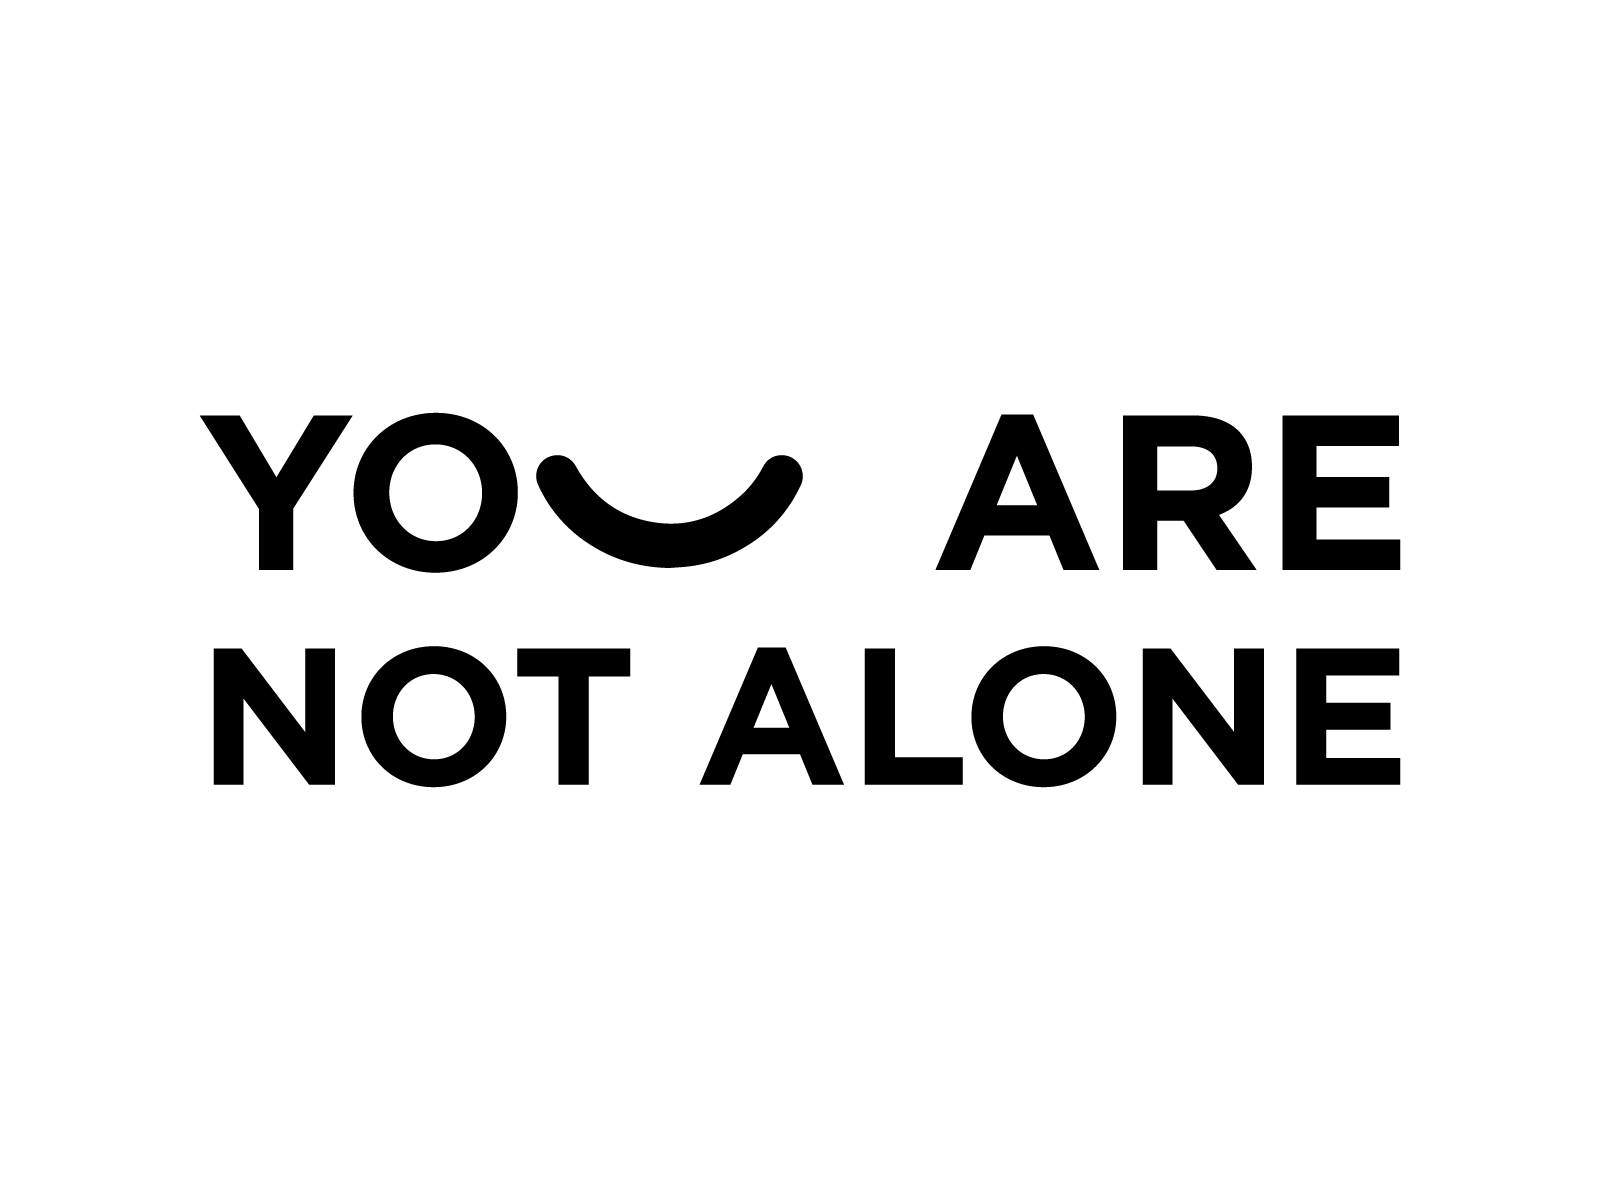 You Are Not Alone by Rob Oldfield on Dribbble